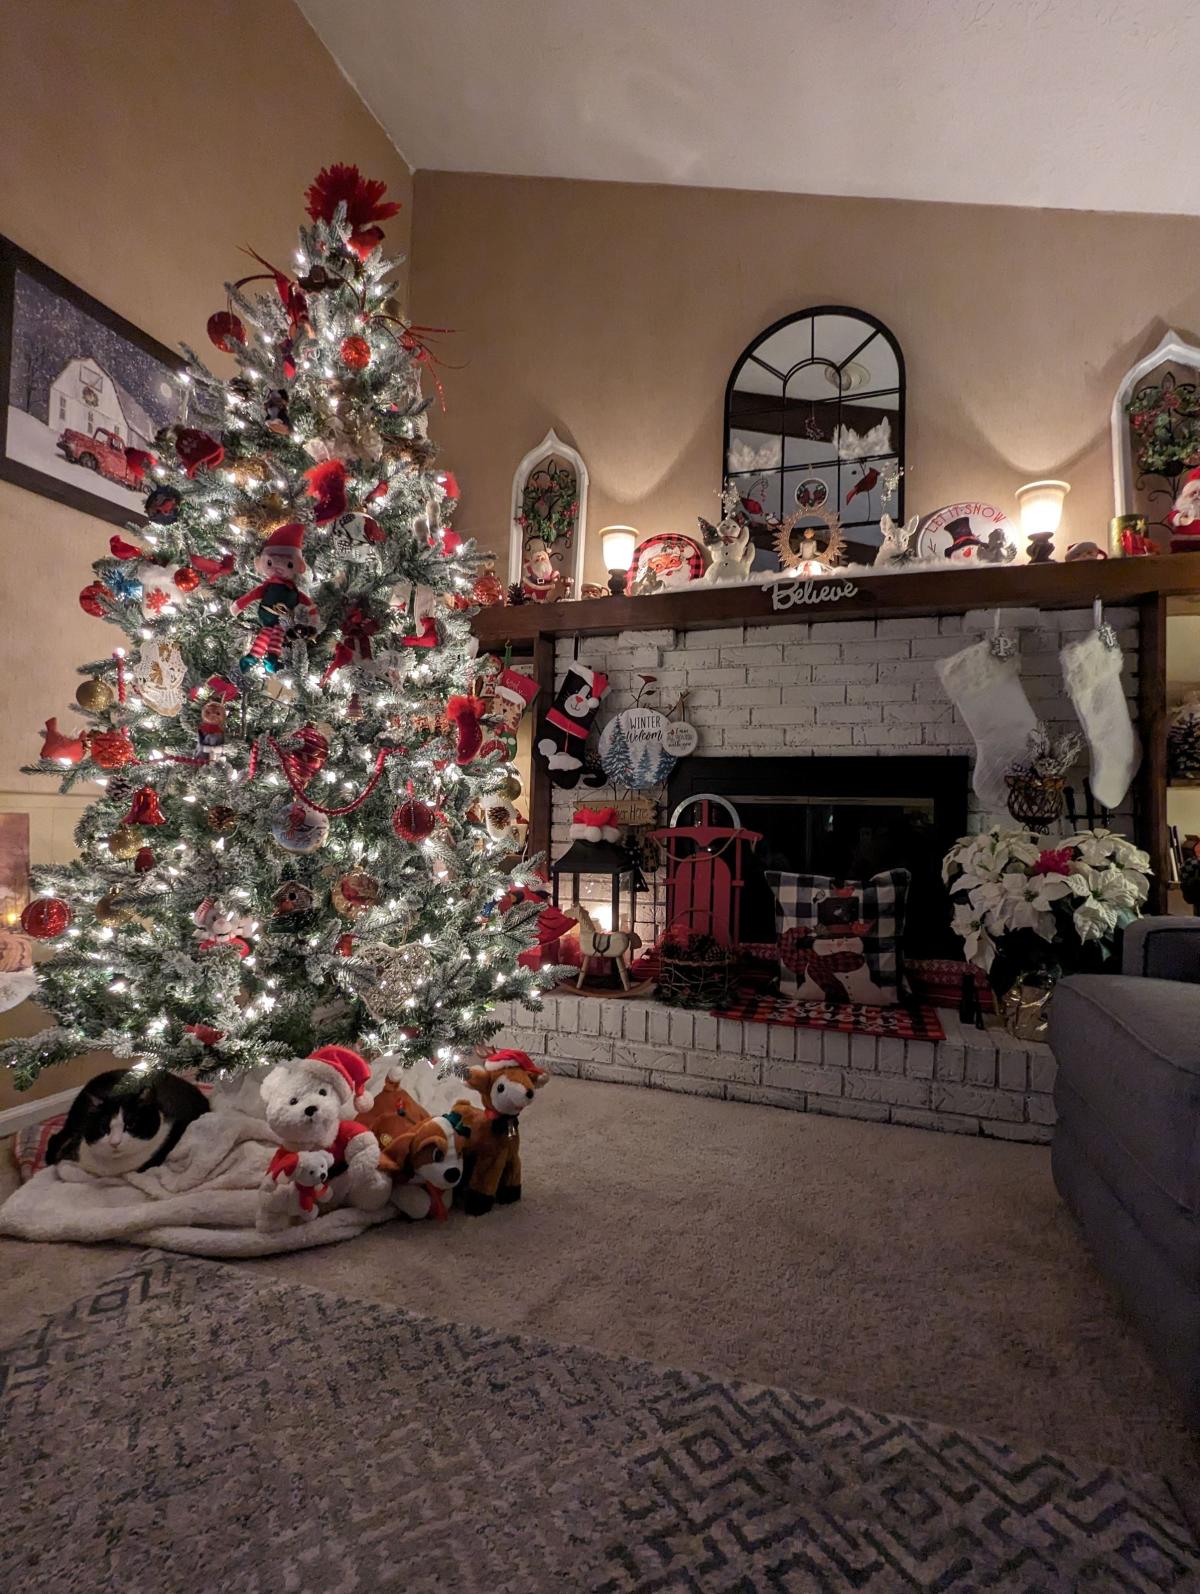 Winners of the Holiday Indoor Decorating Contest announced